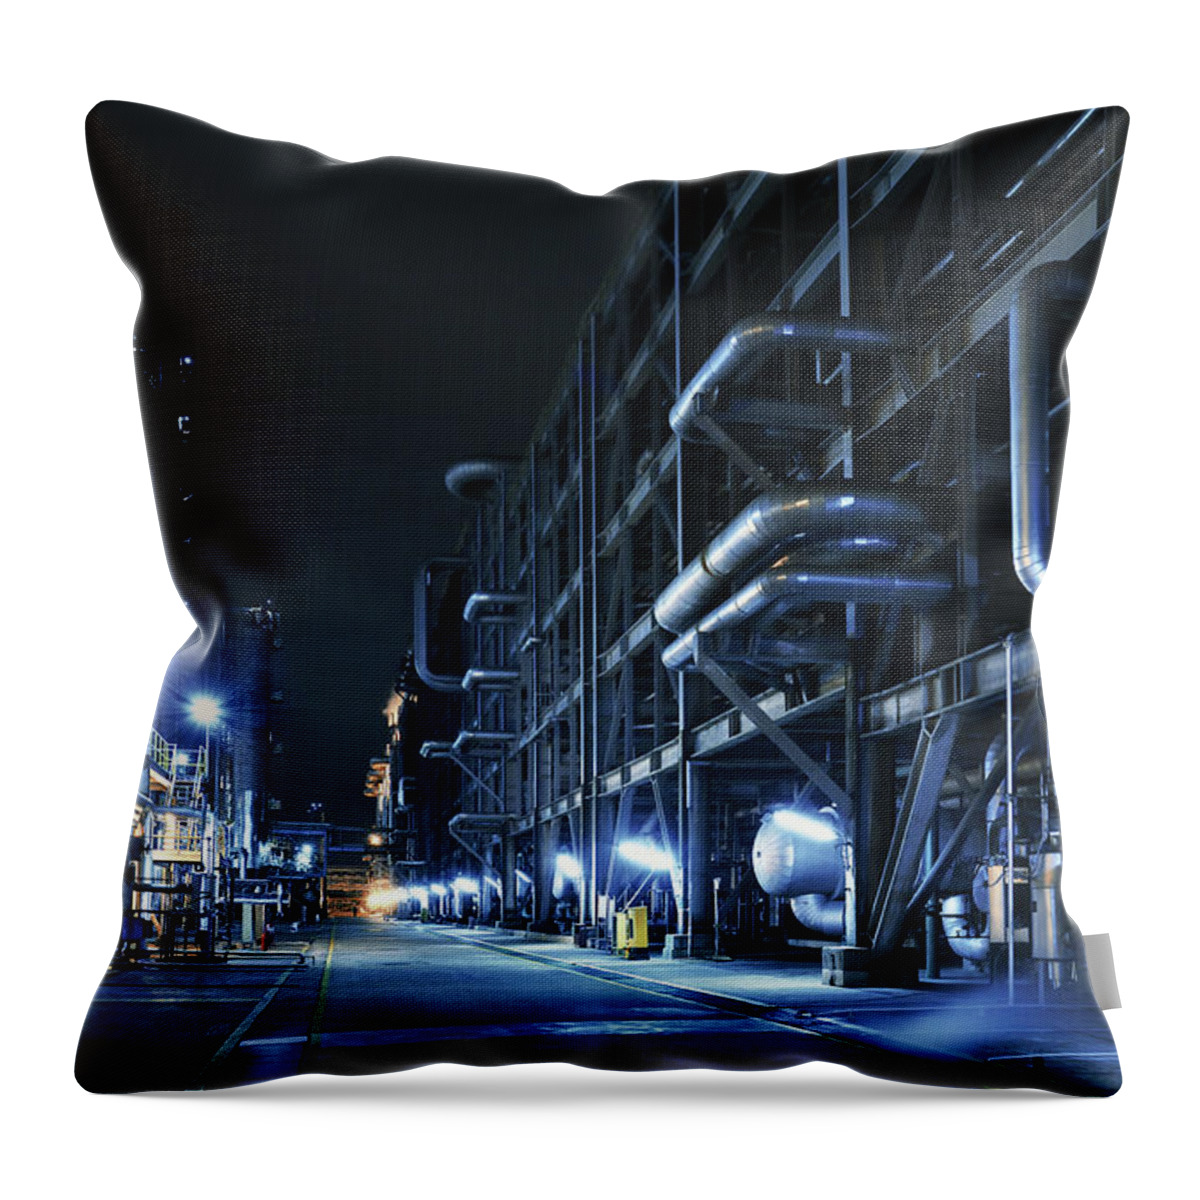 Natural Gas Throw Pillow featuring the photograph Oil Refinery, Chemical & Petrochemical by Zorazhuang